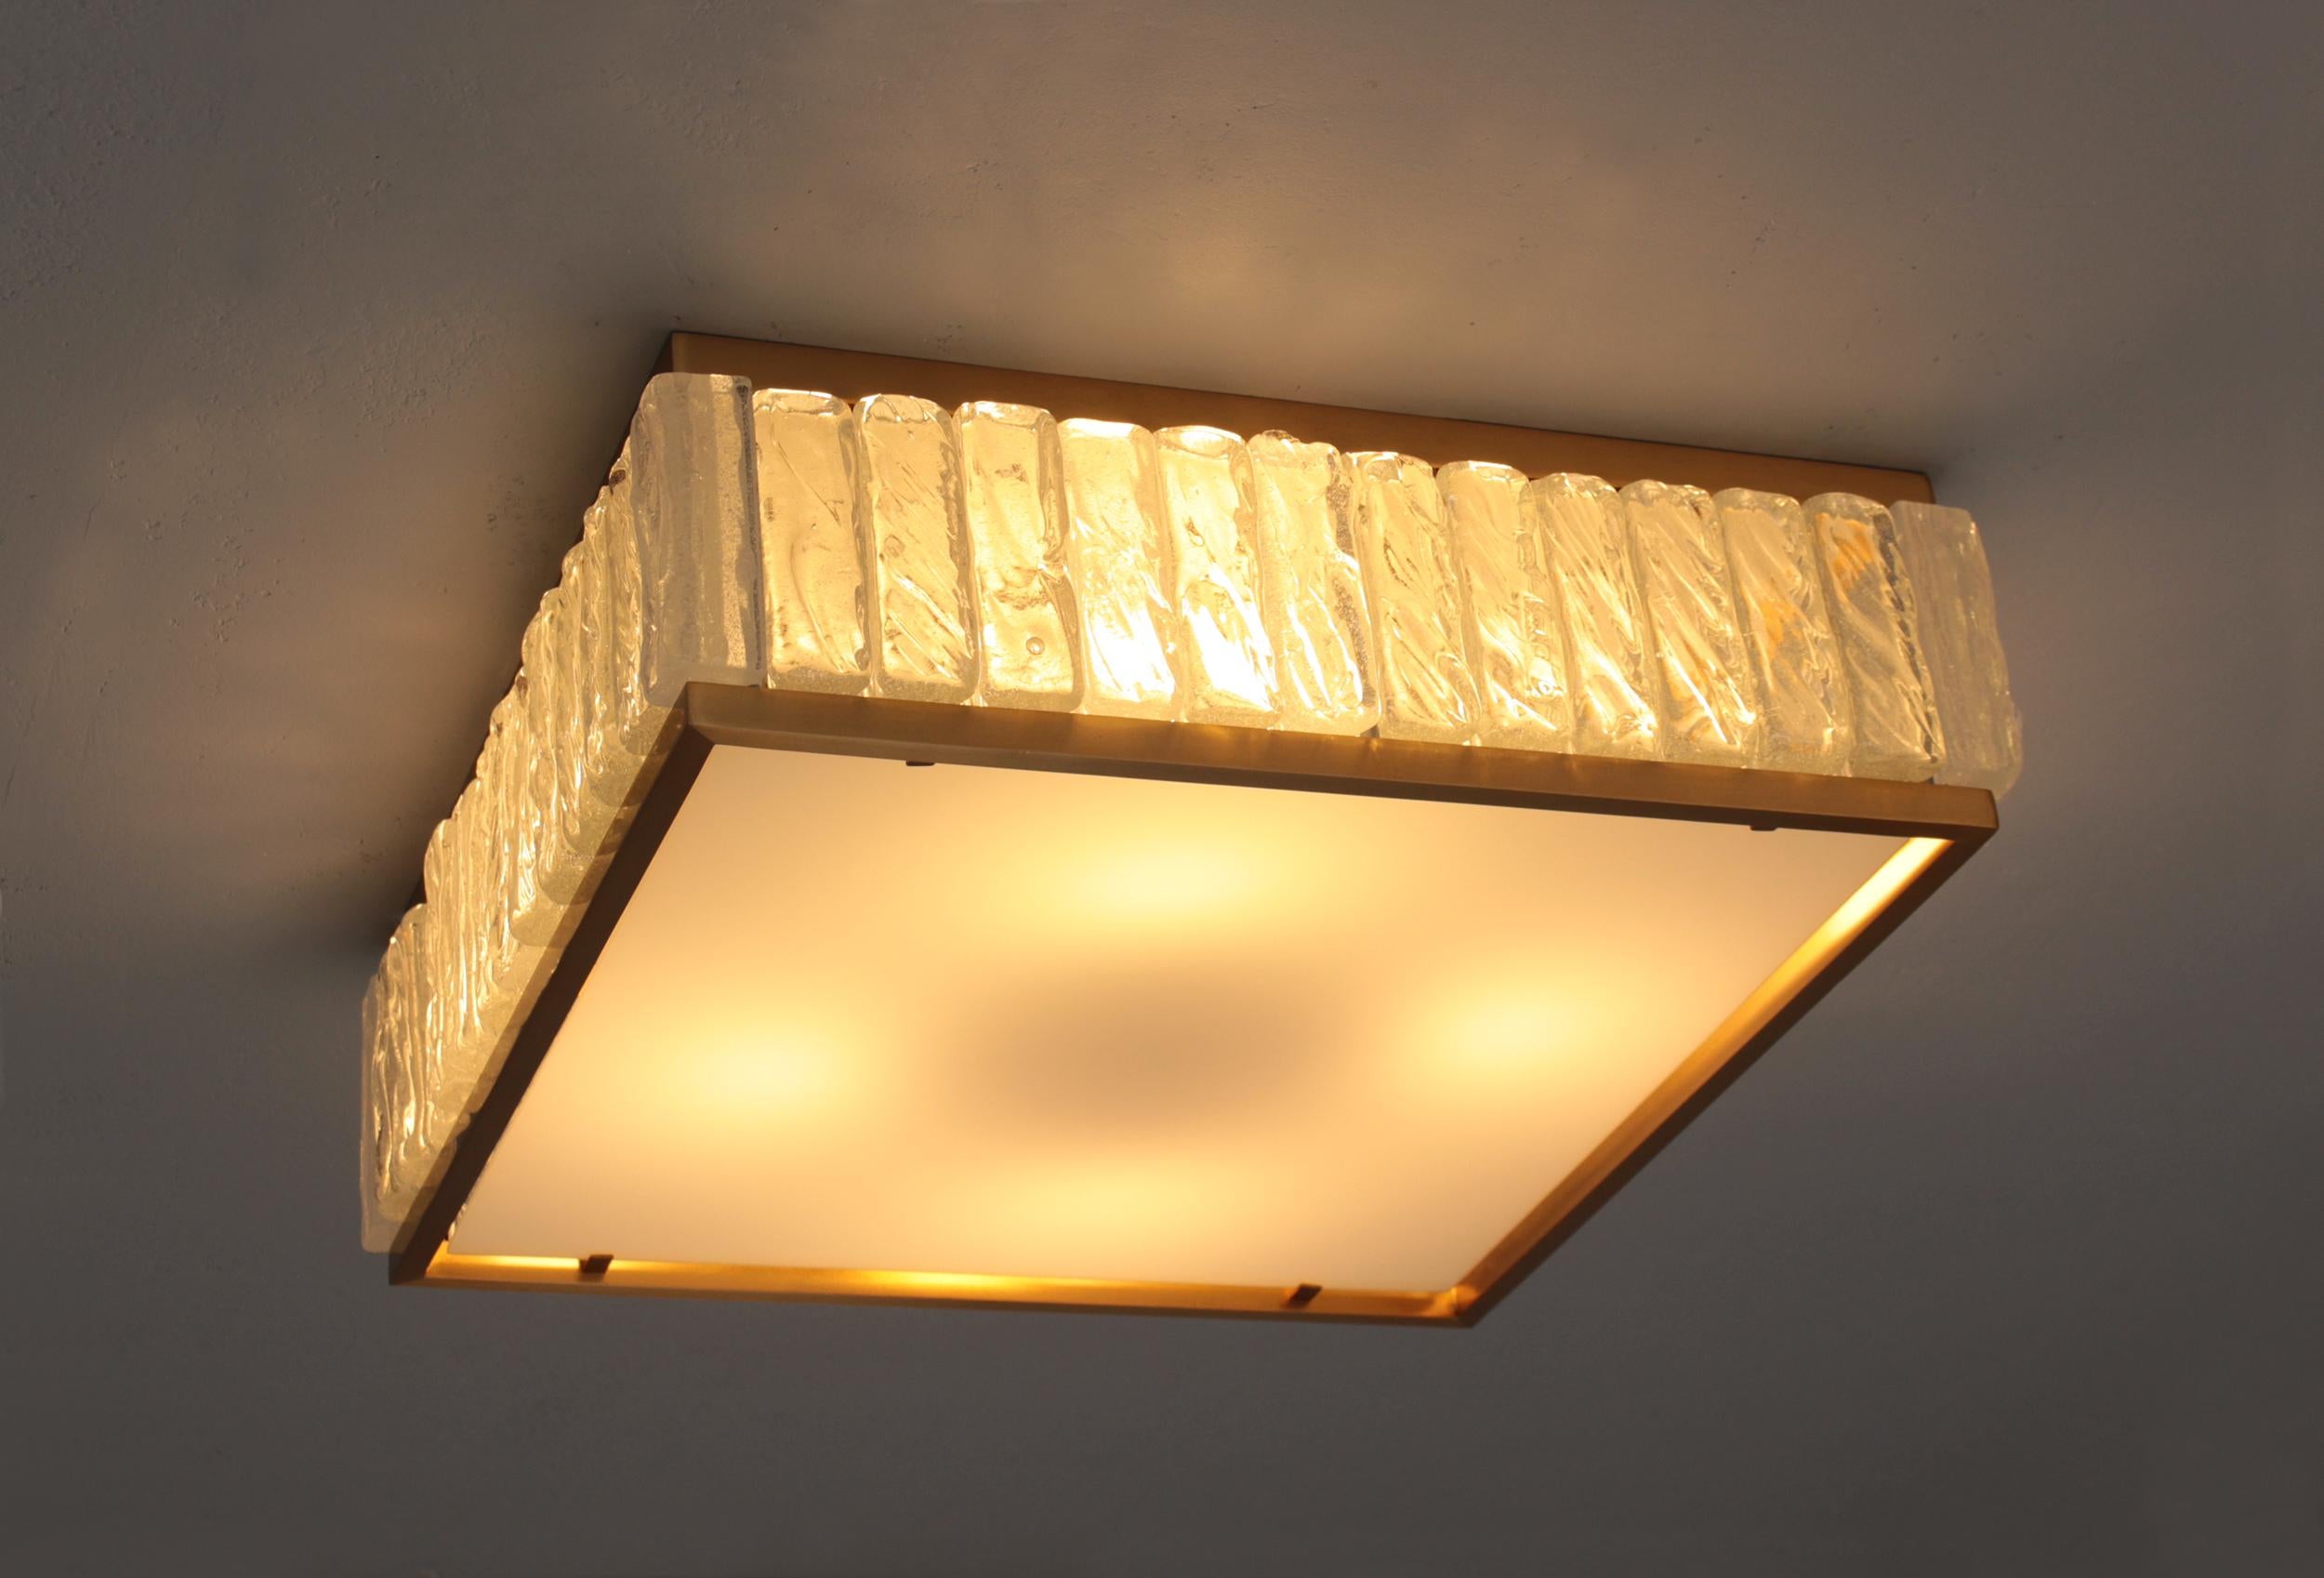 Fine 1950’s Brass and Glass Square “Queen's Necklace” Ceiling Light by Perzel For Sale 1